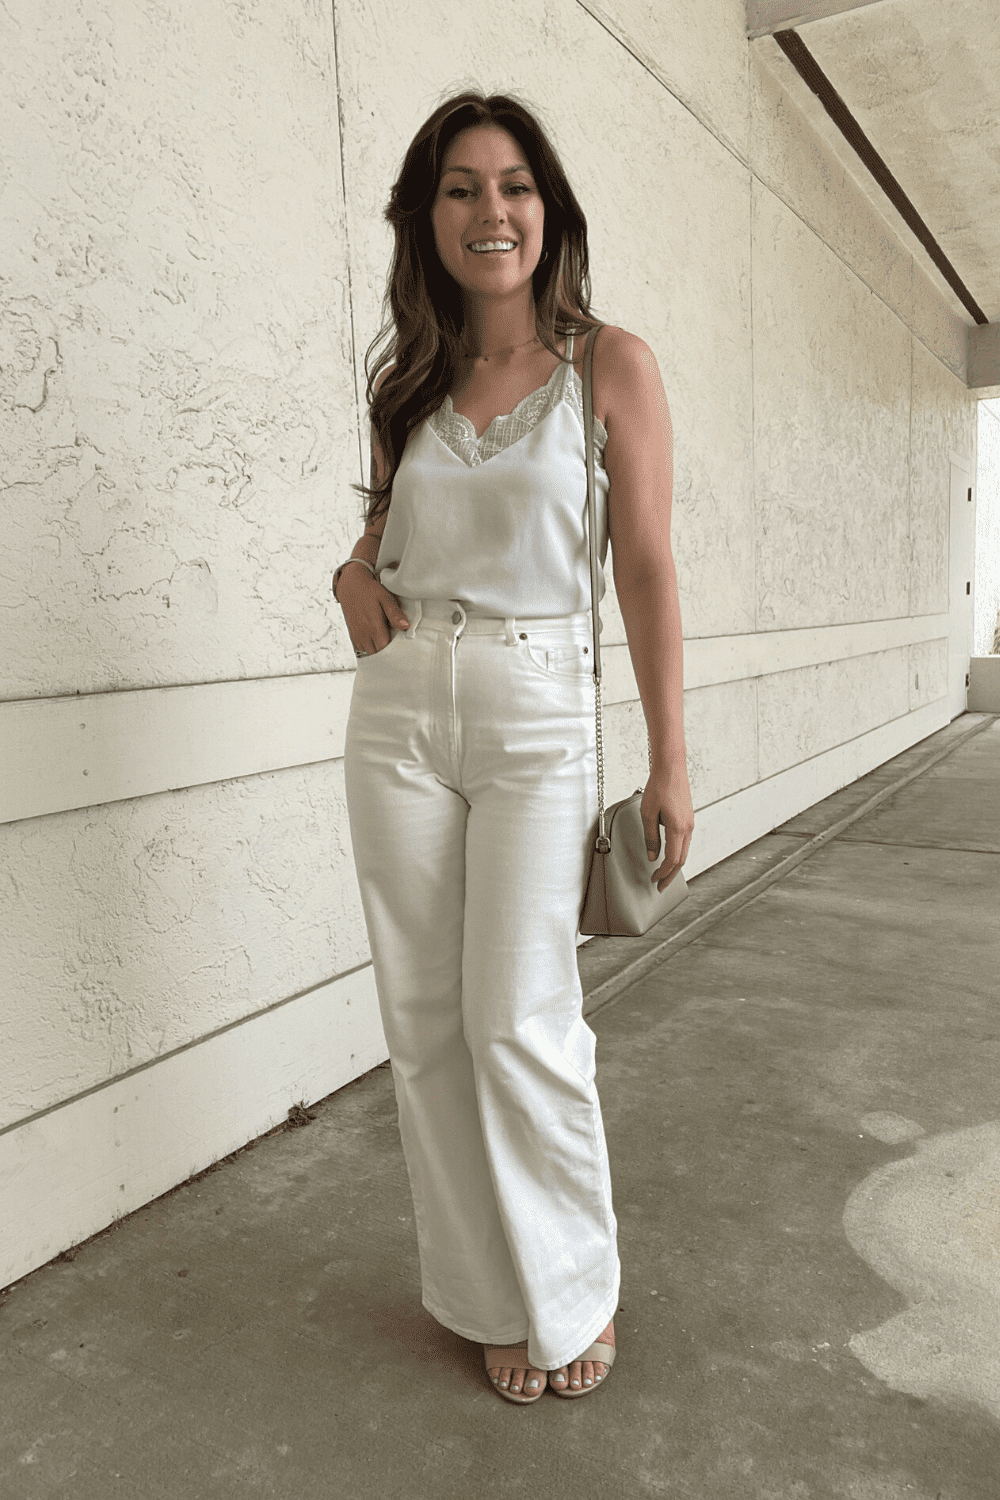 All White Outfit Ideas for Summer